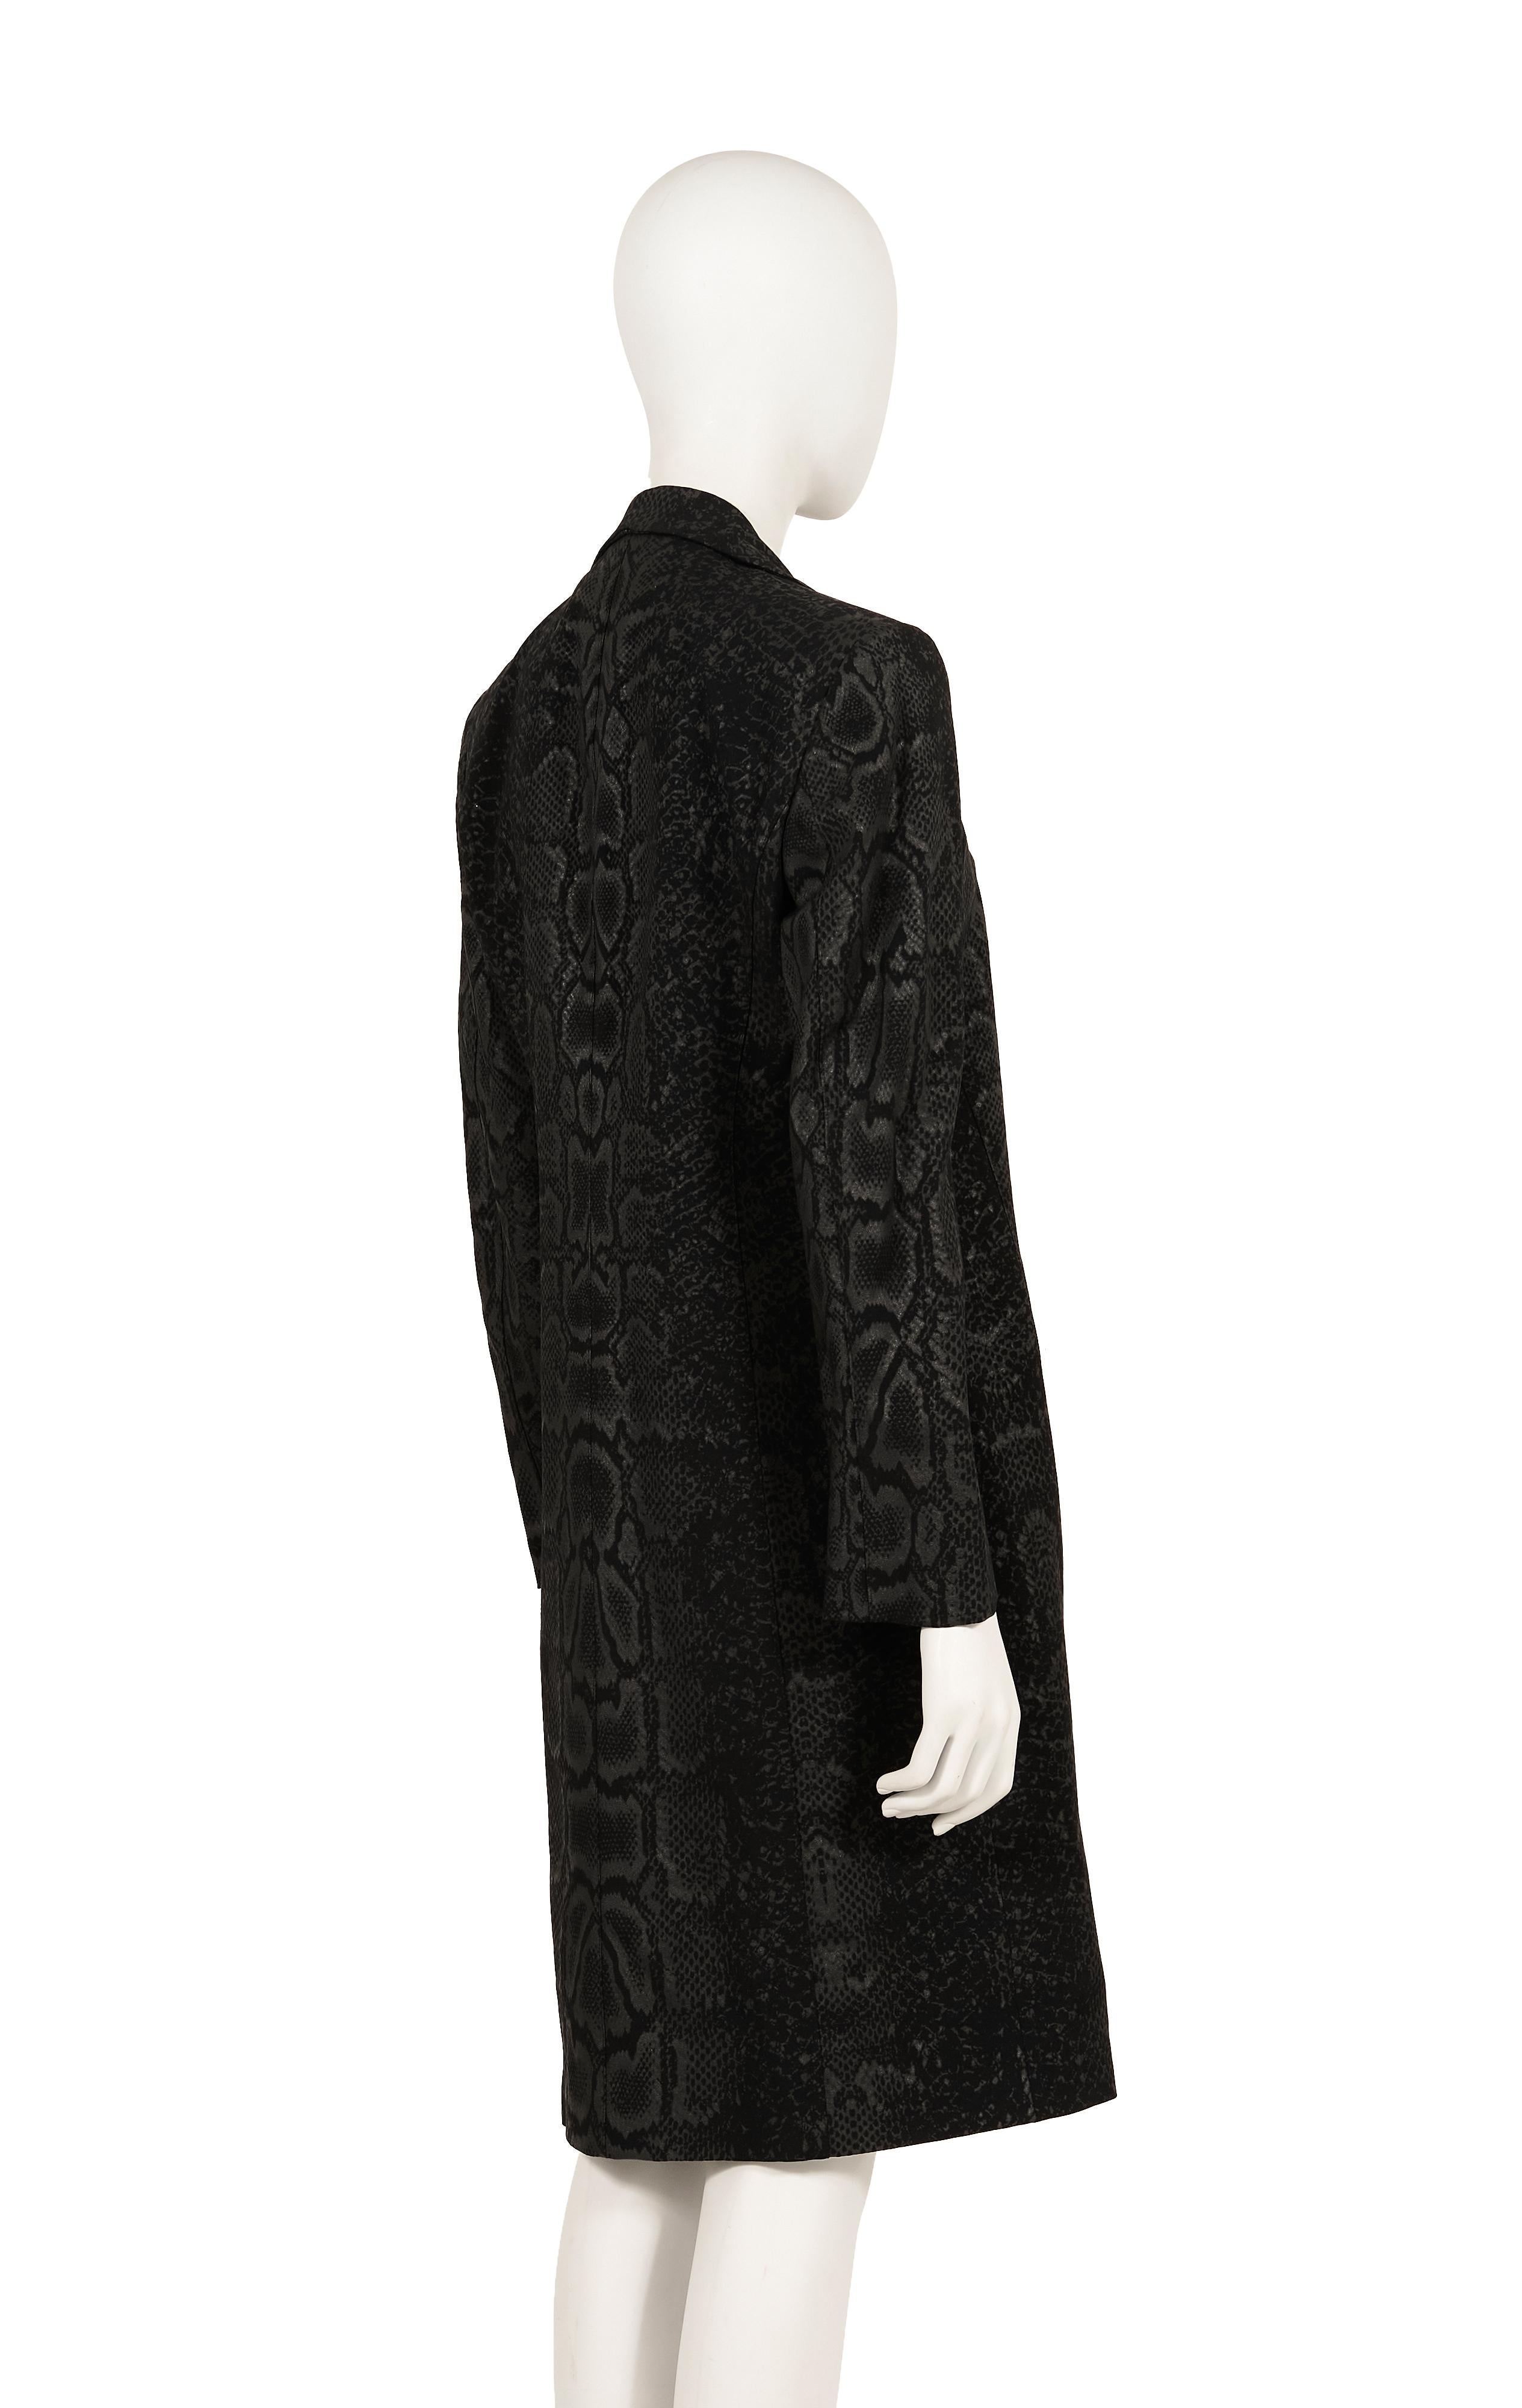 - Roberto Cavalli Fall Winter 1998 collection
- Sold by Gold Palms Vintage 
- Reflective black snakeskin print coat
- Wool/viscose blend
- Size M

Measurements (laid flat)
 
Shoulder length: 41 cm / 16.1 inch
Bust: 42 cm / 16.5 inch
Length: 94 cm /